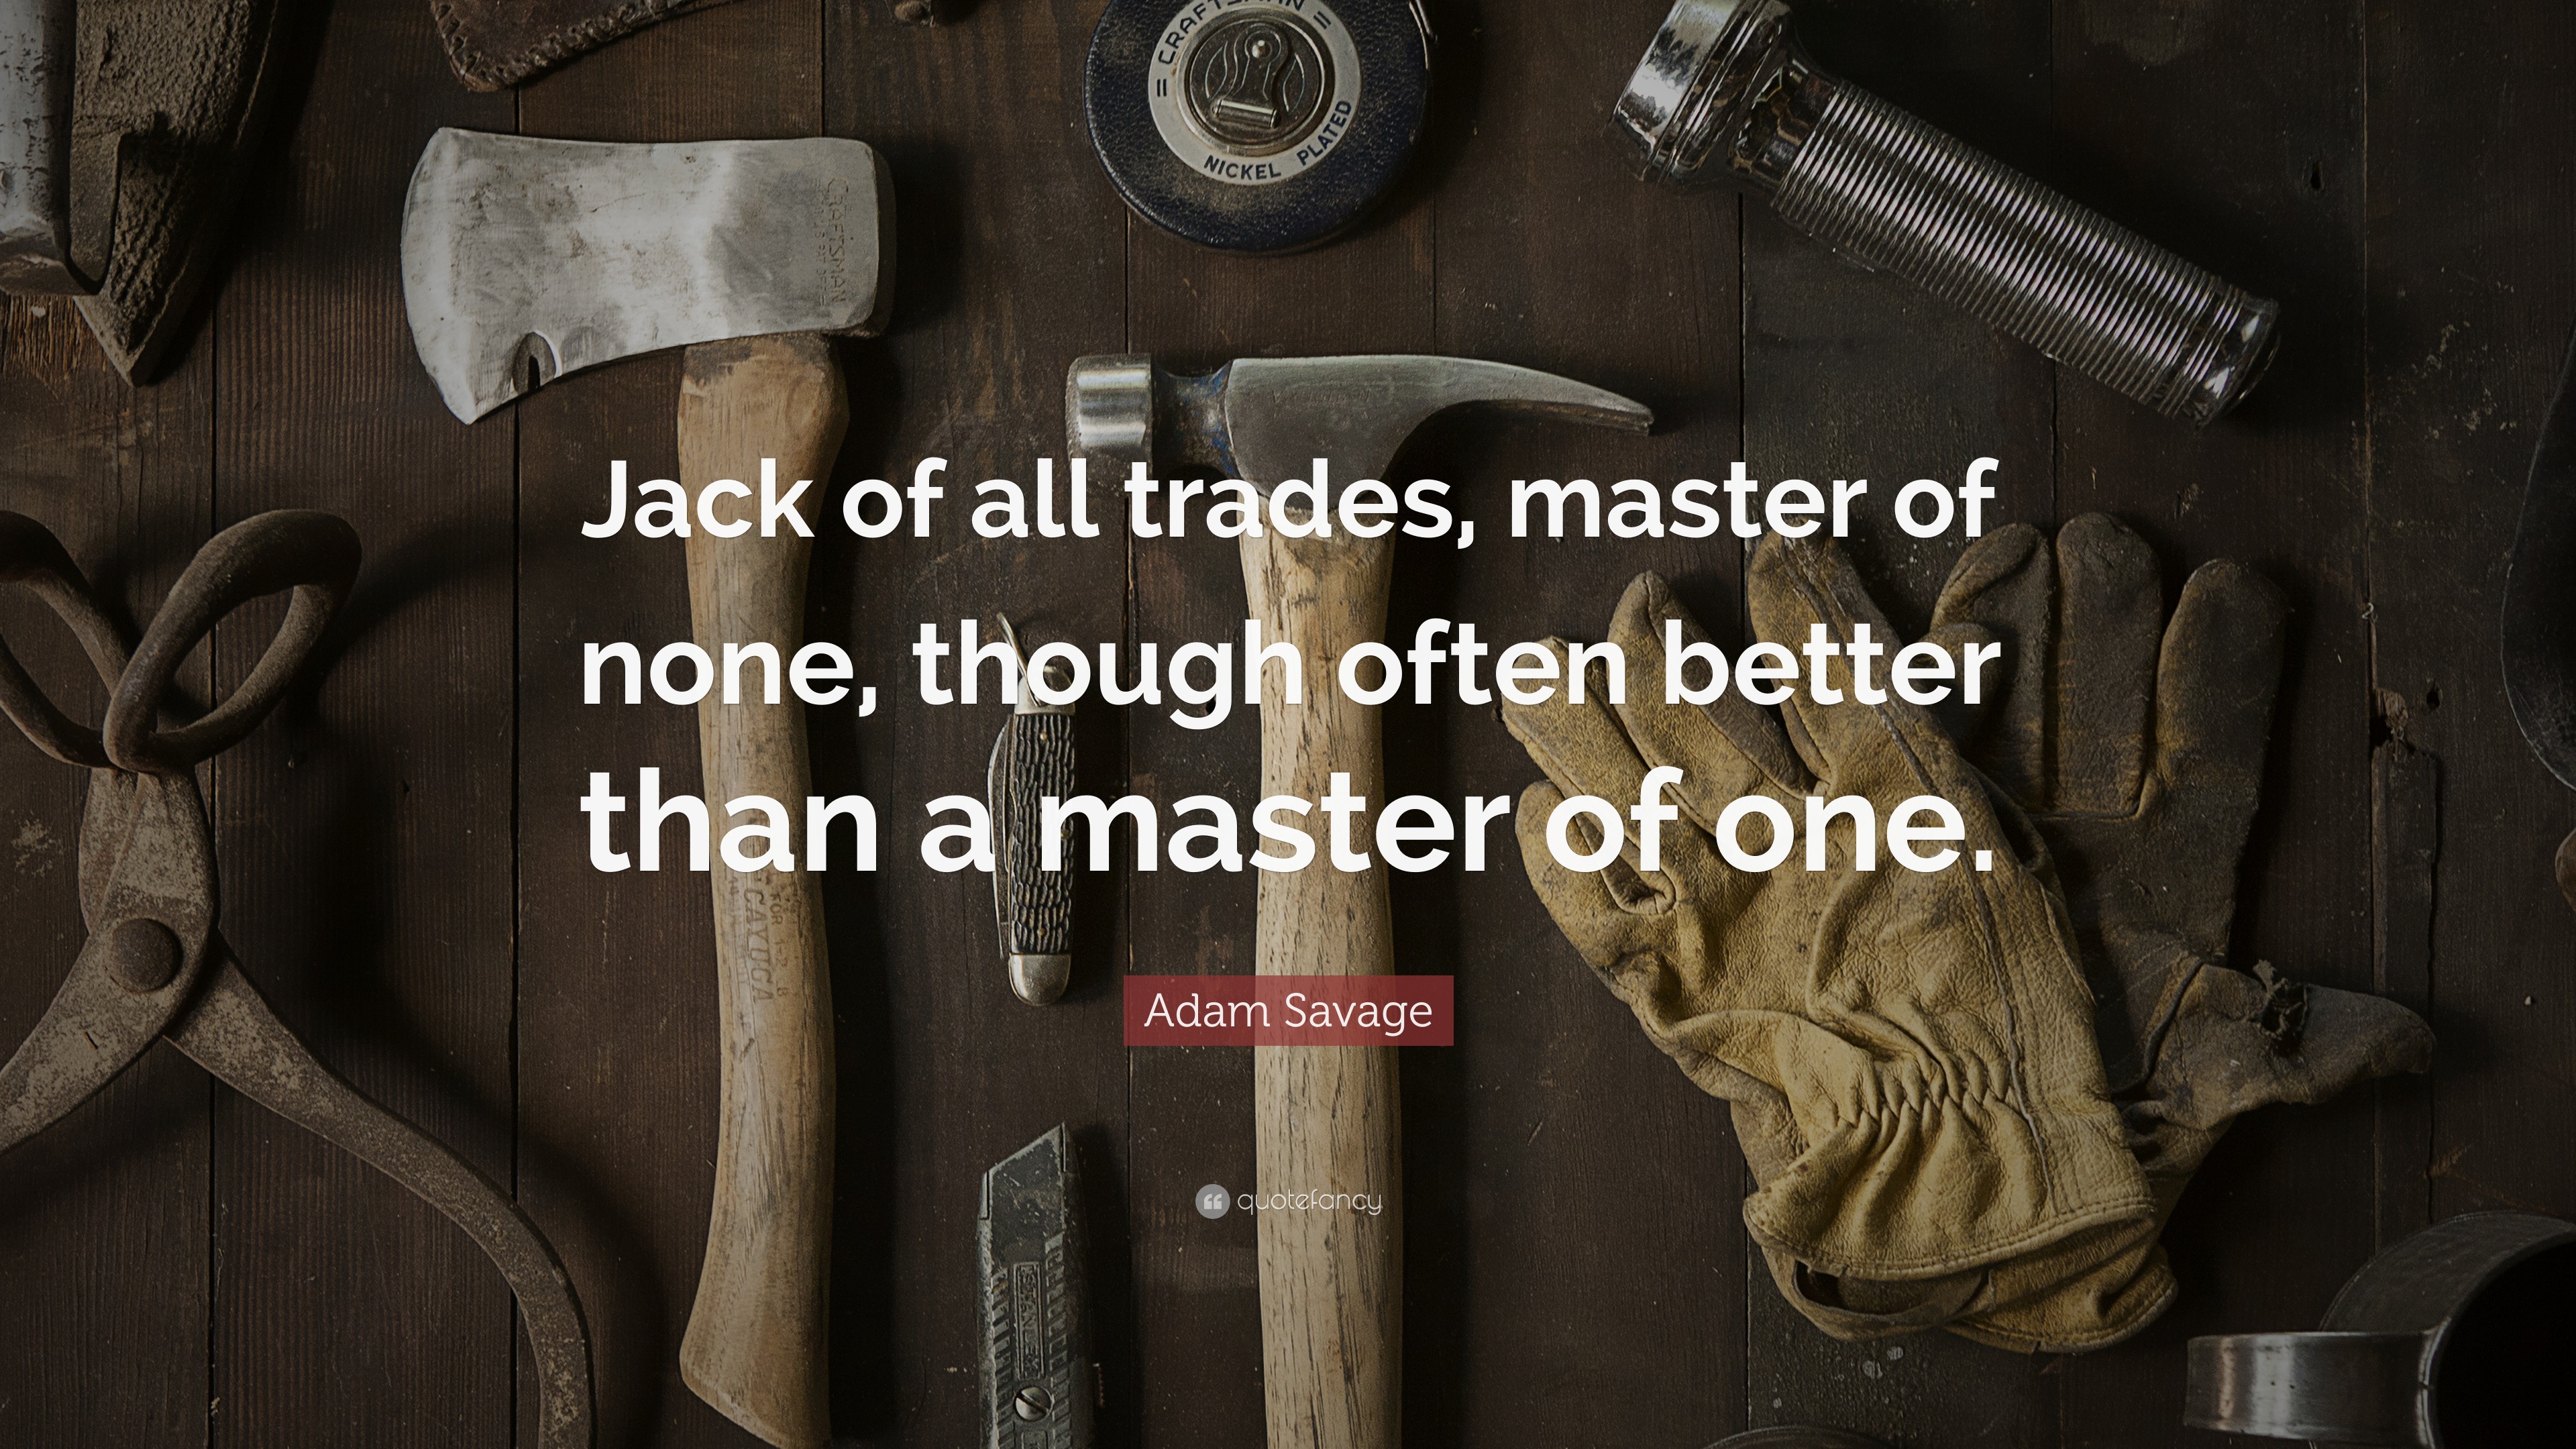 Jack of all trades master of none